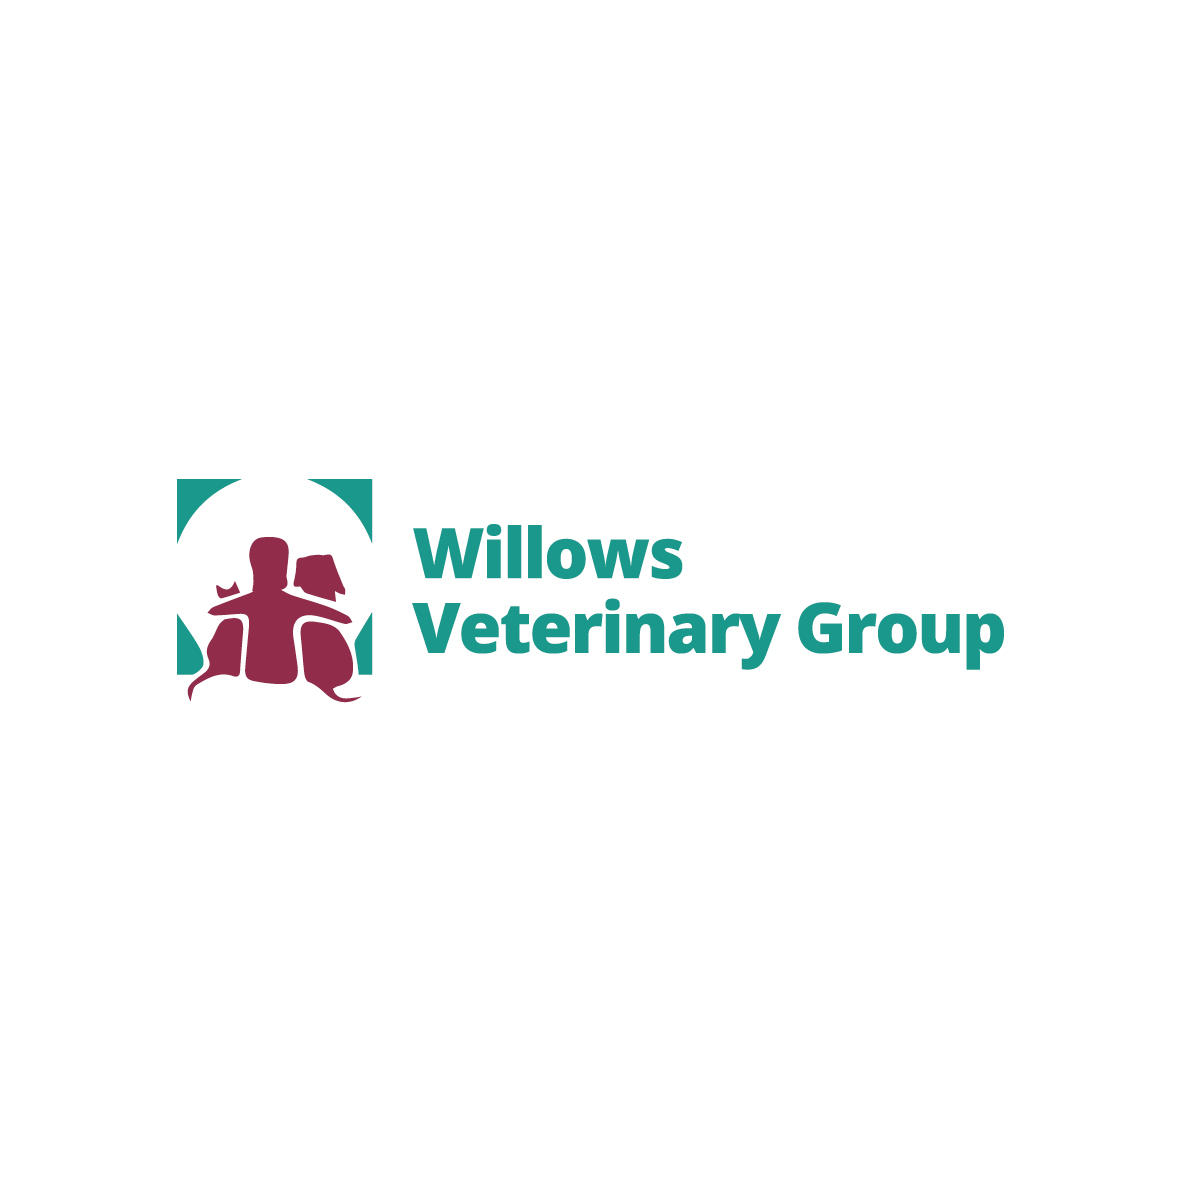 Willows Veterinary Group - Willows Veterinary Hospital Northwich 01606 723202